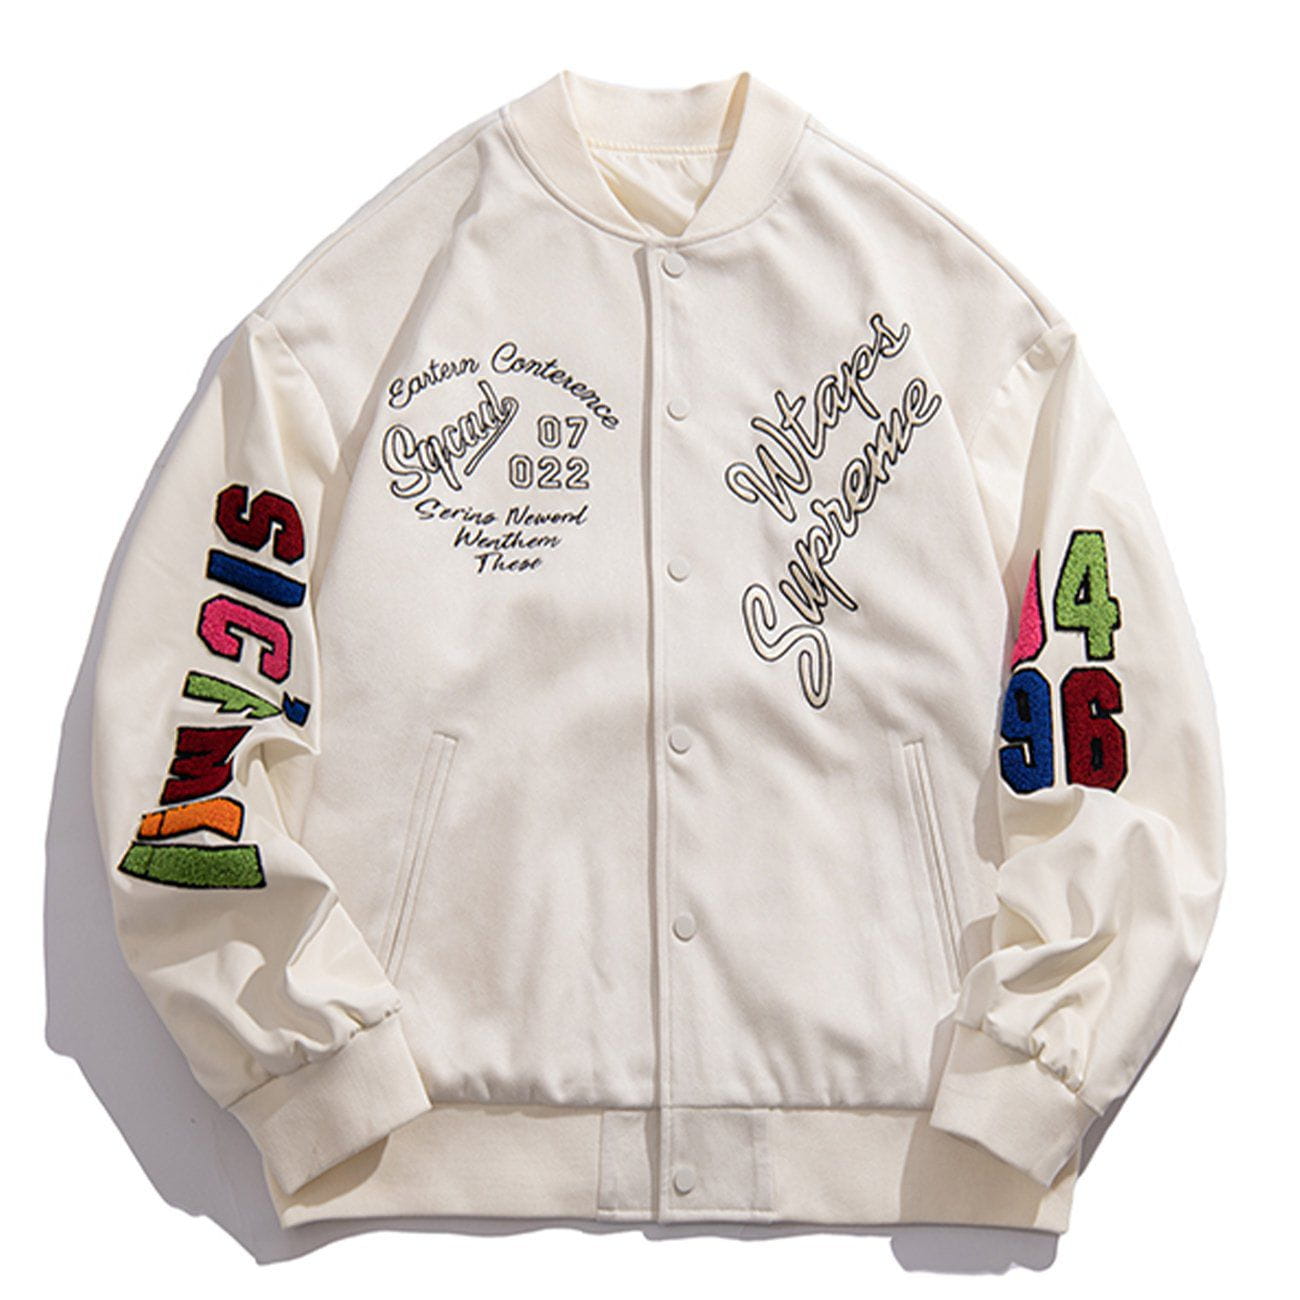 Letter Embroidered Flocked Varsity Jacket Streetwear Brand Techwear Combat Tactical YUGEN THEORY